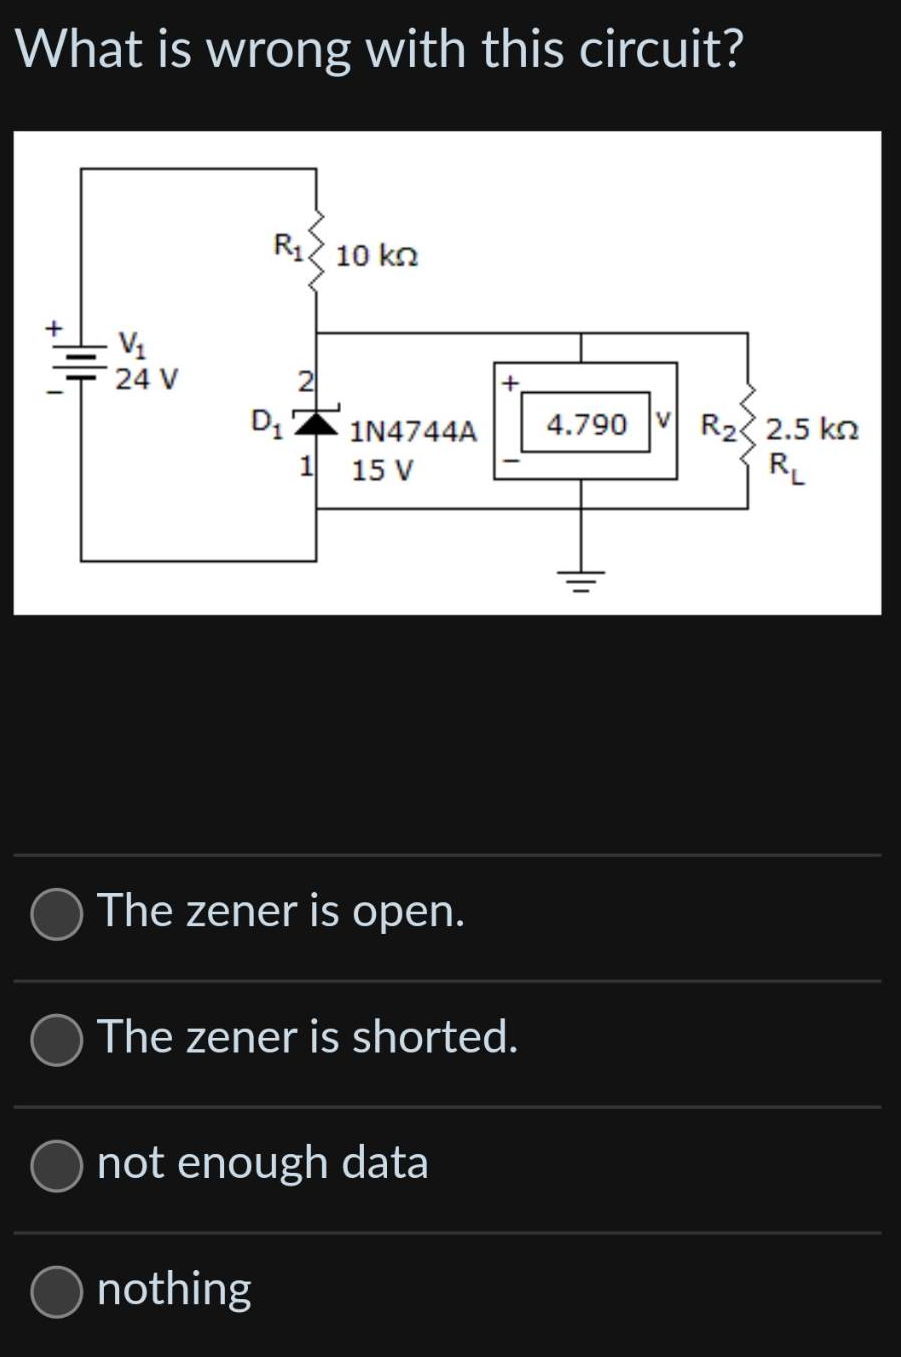 What is wrong with this circuit?
V₁
24 V
R₁ 10 kn
D₁
1N4744A
1 15 V
The zener is open.
nothing
The zener is shorted.
not enough data
4.790 VR₂2.5 kn
R₁